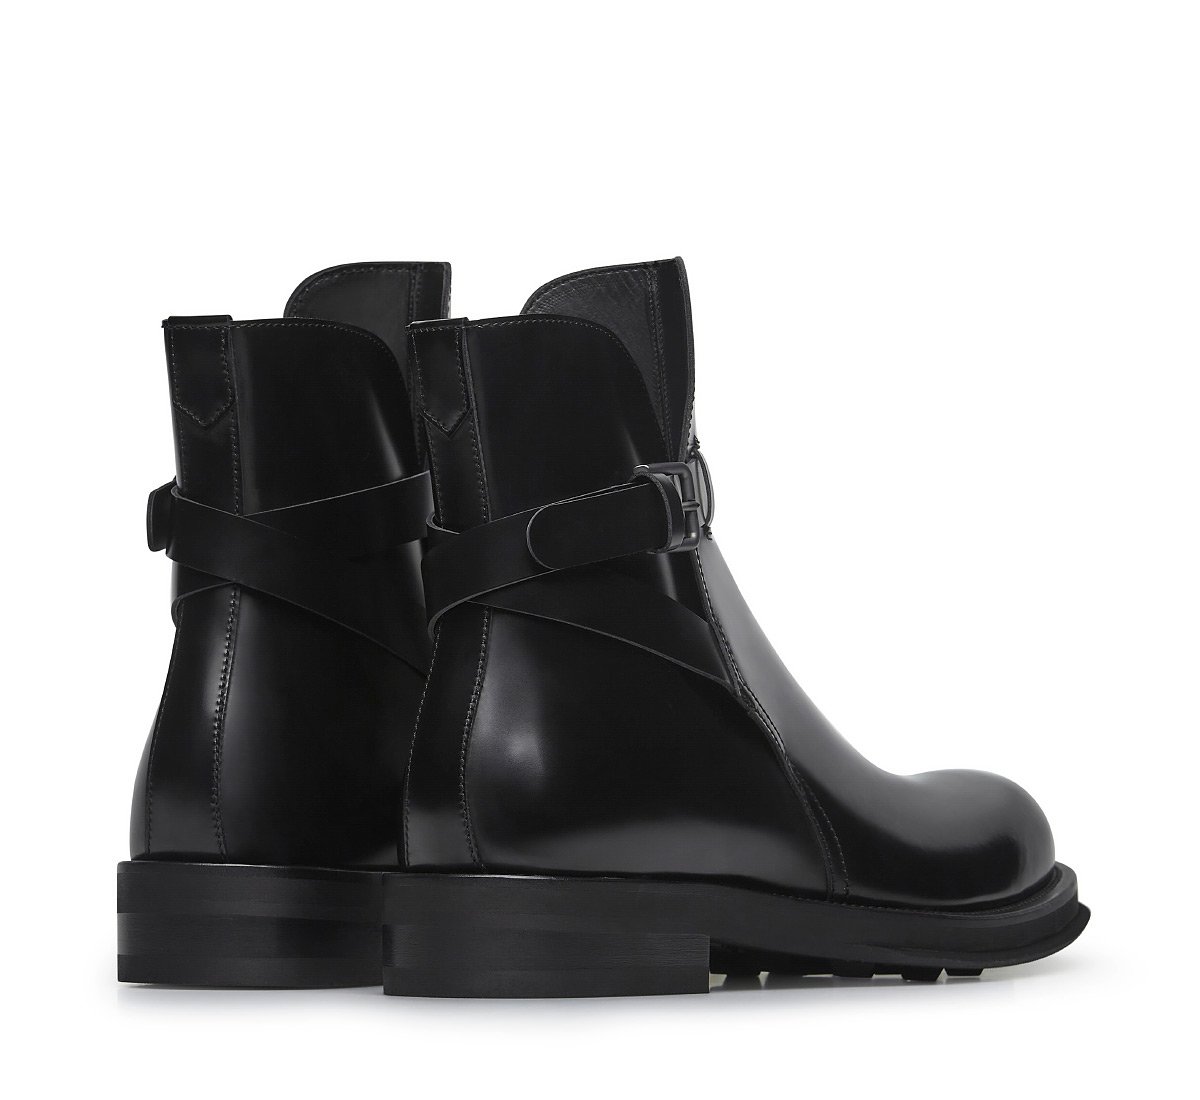 Fabi calf leather ankle boot